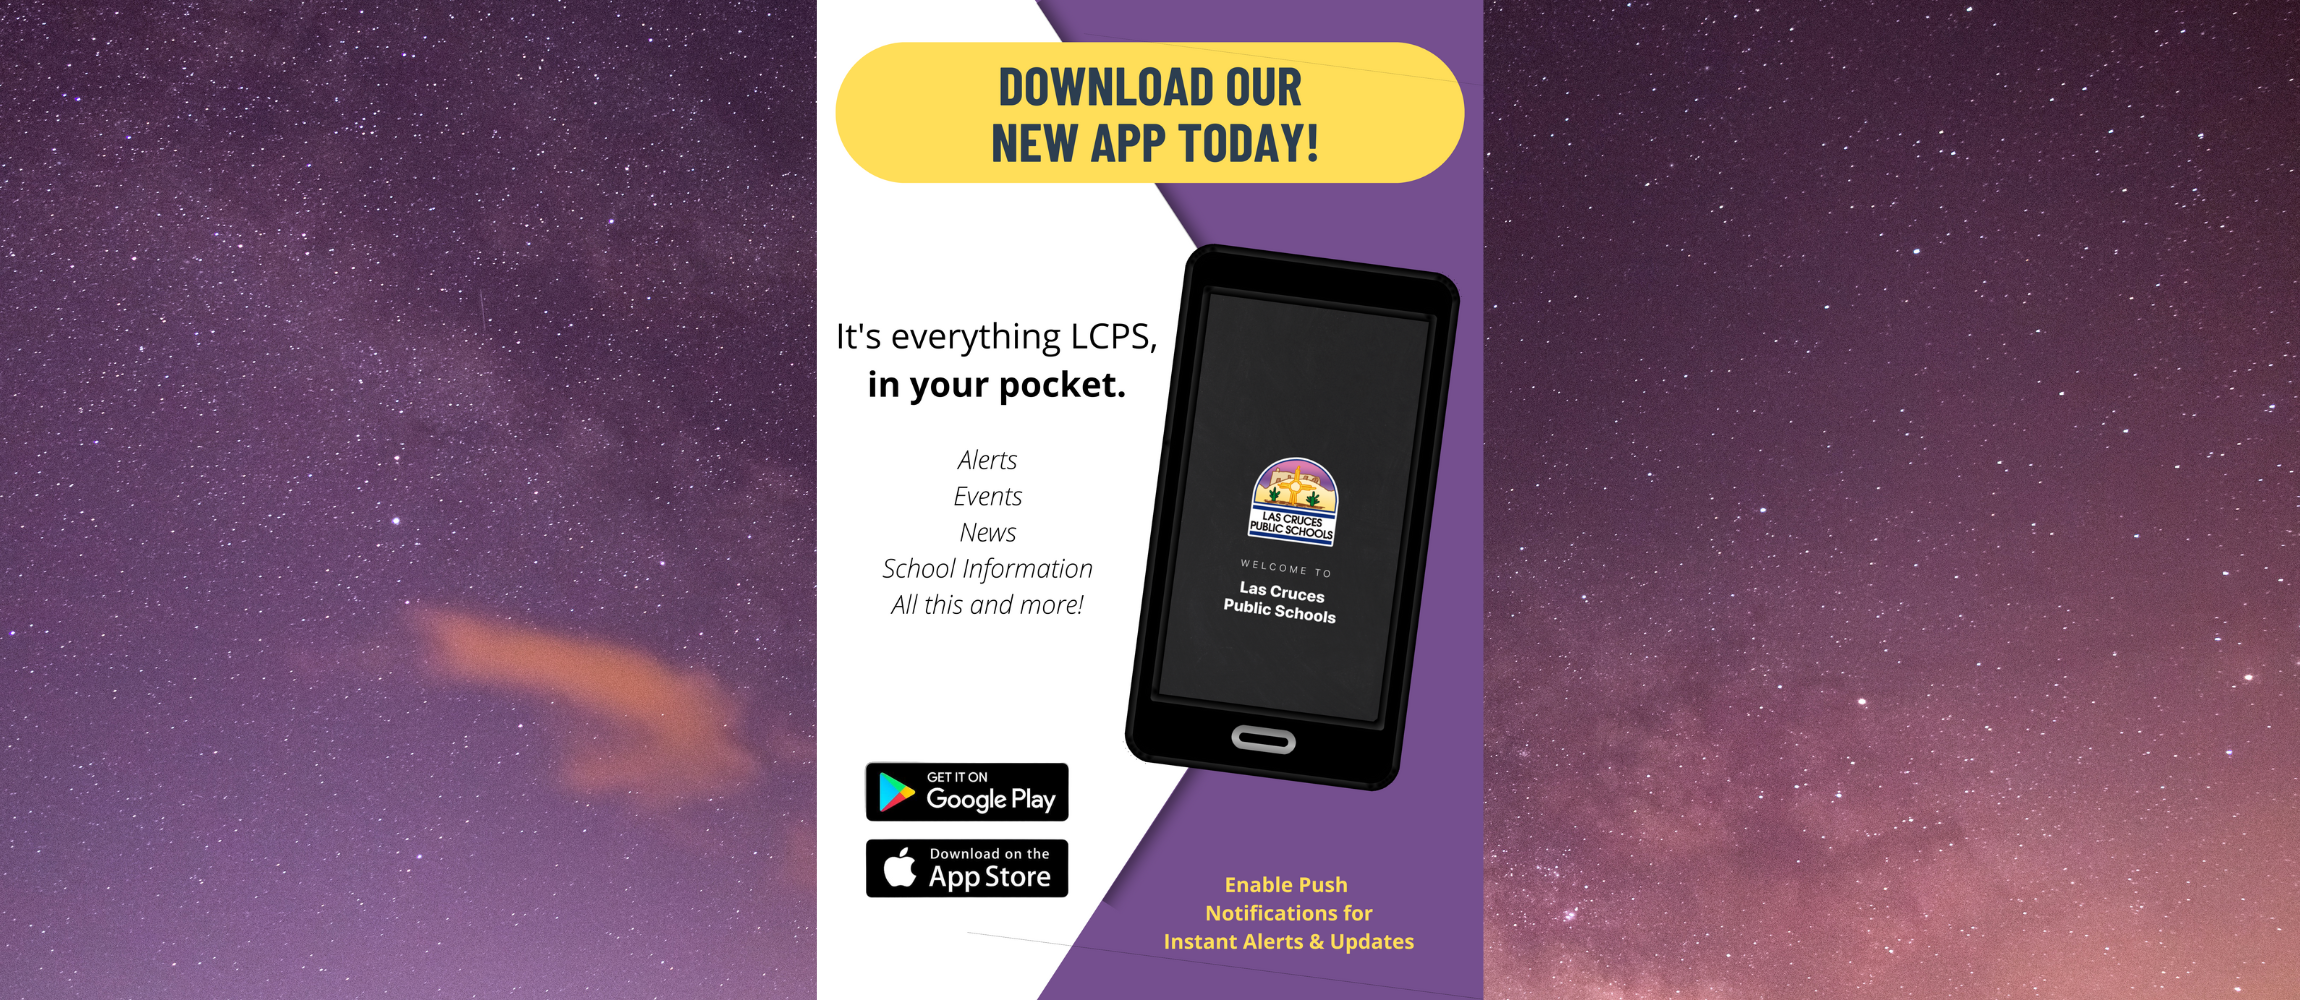 Download new lcps app